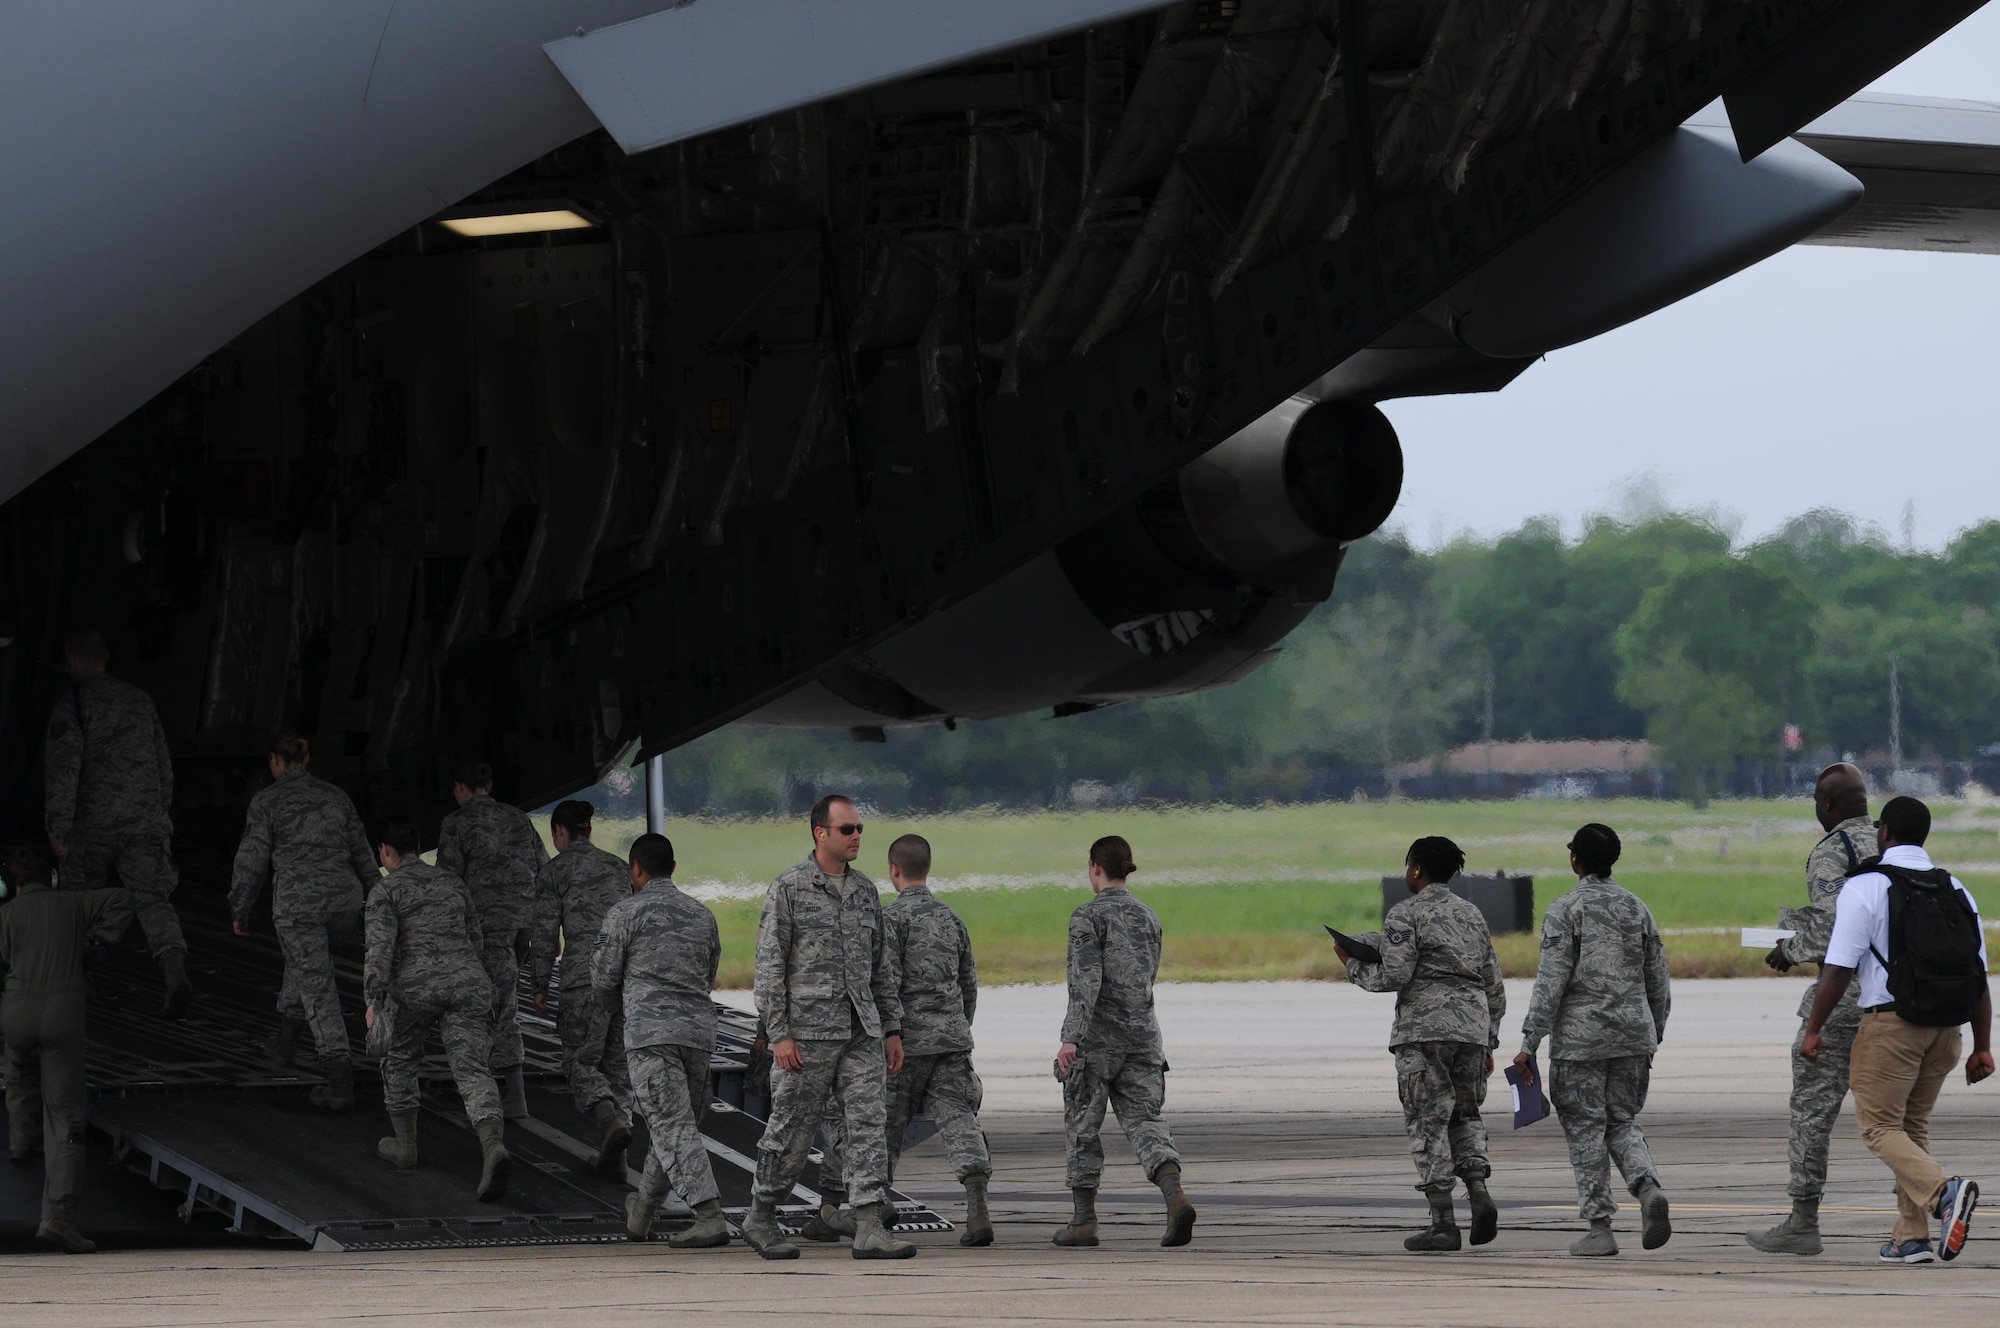 Air Force ROTC cadets board a C-17 Globemaster III for an incentive flight during Pathways to Blue April 15, 2016, Keesler Air Force Base, Miss. Pathways to Blue, a diversity outreach event hosted by 2nd Air Force, the 81st Training Wing and the 403rd Wing, included more than 180 cadets from Air Force ROTC detachments from various colleges and universities. Cadets received hands-on briefings on technical and flying operations and an orientation flight in support of the Air Force's Diversity Strategic Roadmap program. (U.S. Air Force photo by Kemberly Groue)